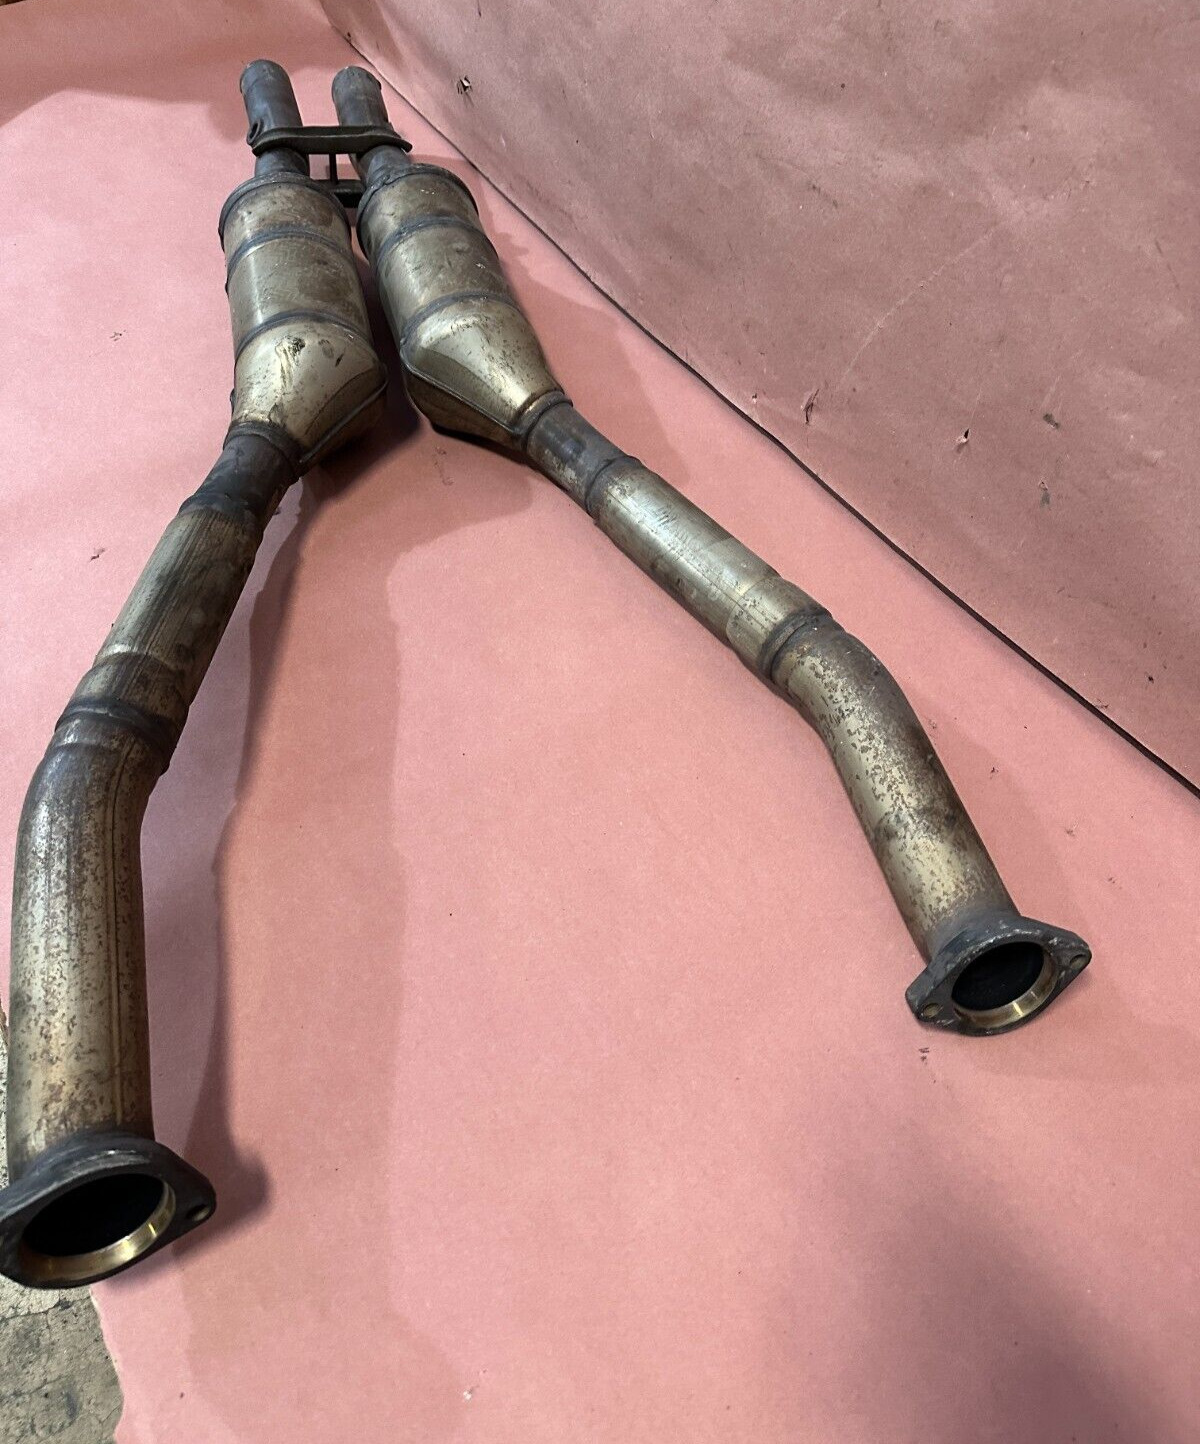 BMW E38 740IL E39 540I M62 Exhaust Manifold System OEM 127K MLS Tested